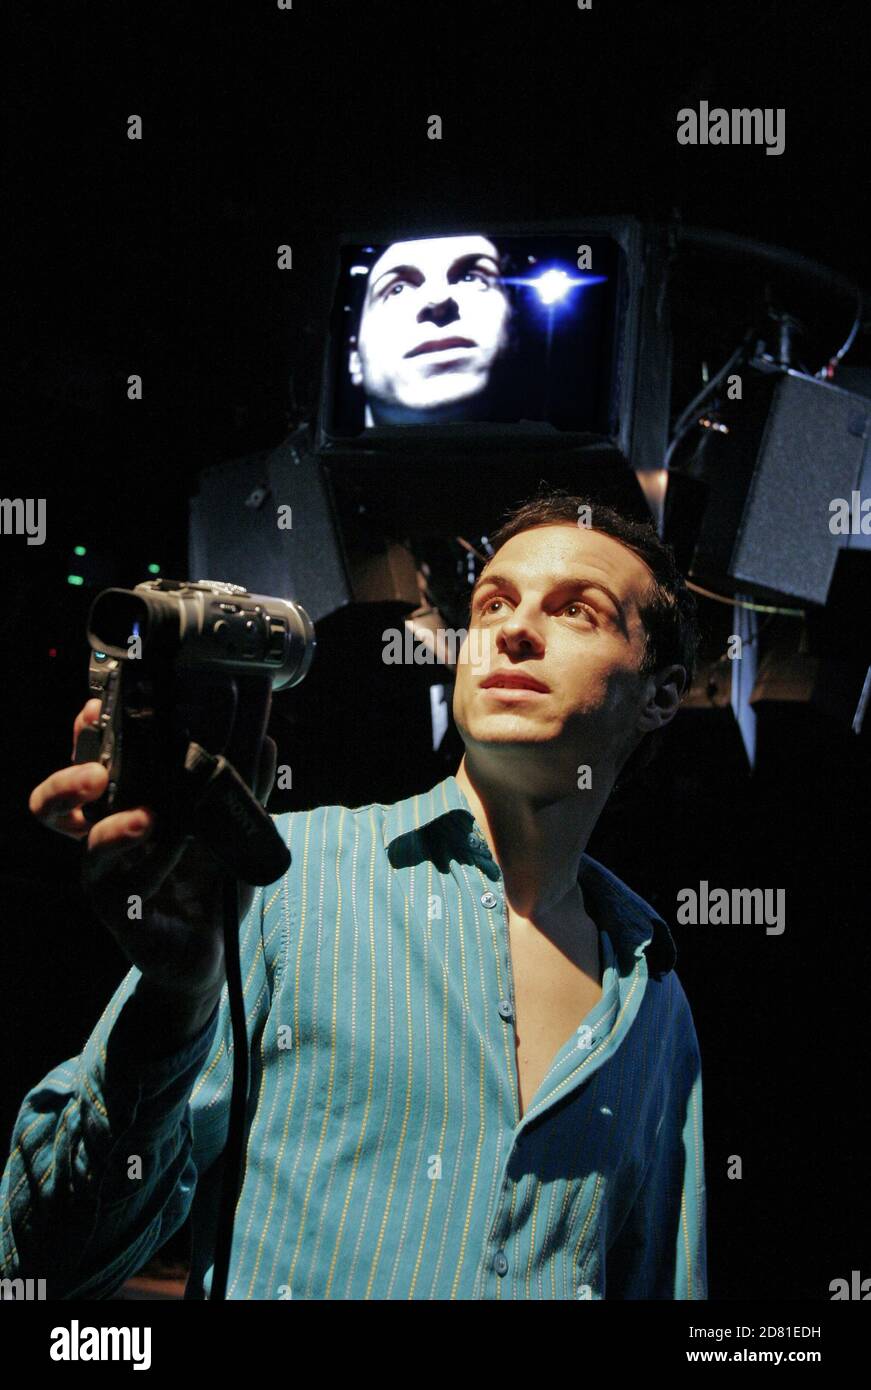 Andrew Scott (Alex) in A GIRL IN A CAR WITH A MAN by Rob Evans at the Jerwood Theatre Upstairs, Royal Court Theatre, London SW1  29/11/2004  director: Joe Hill-Gibbins Stock Photo